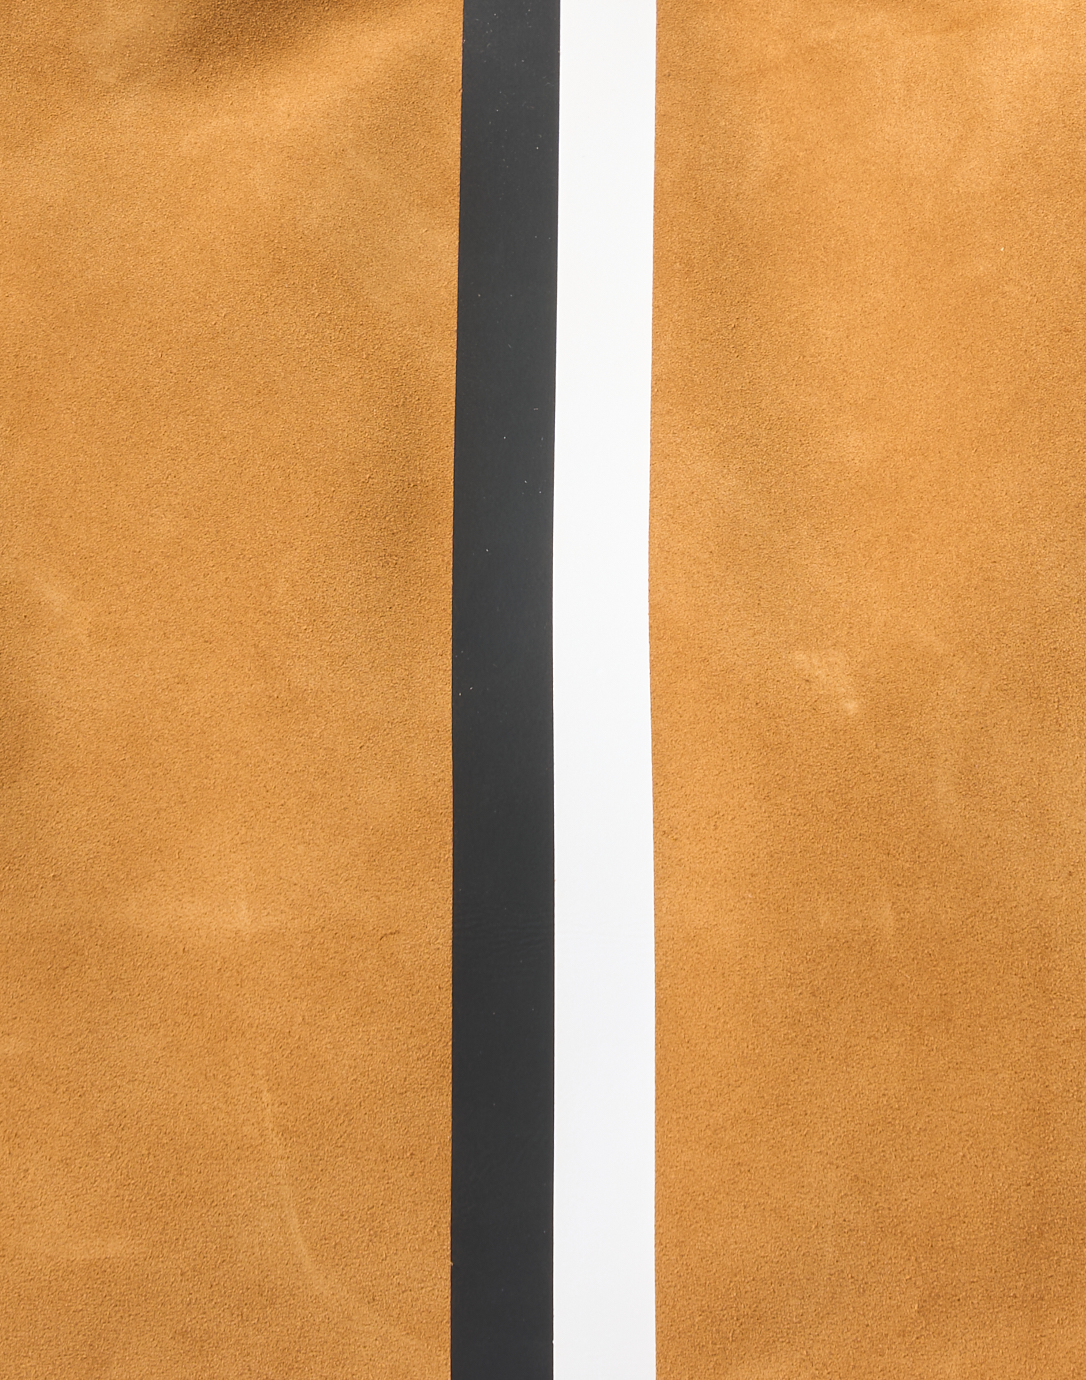 Simple Tote Camel Suede with Black & White Stripes – Clare V.